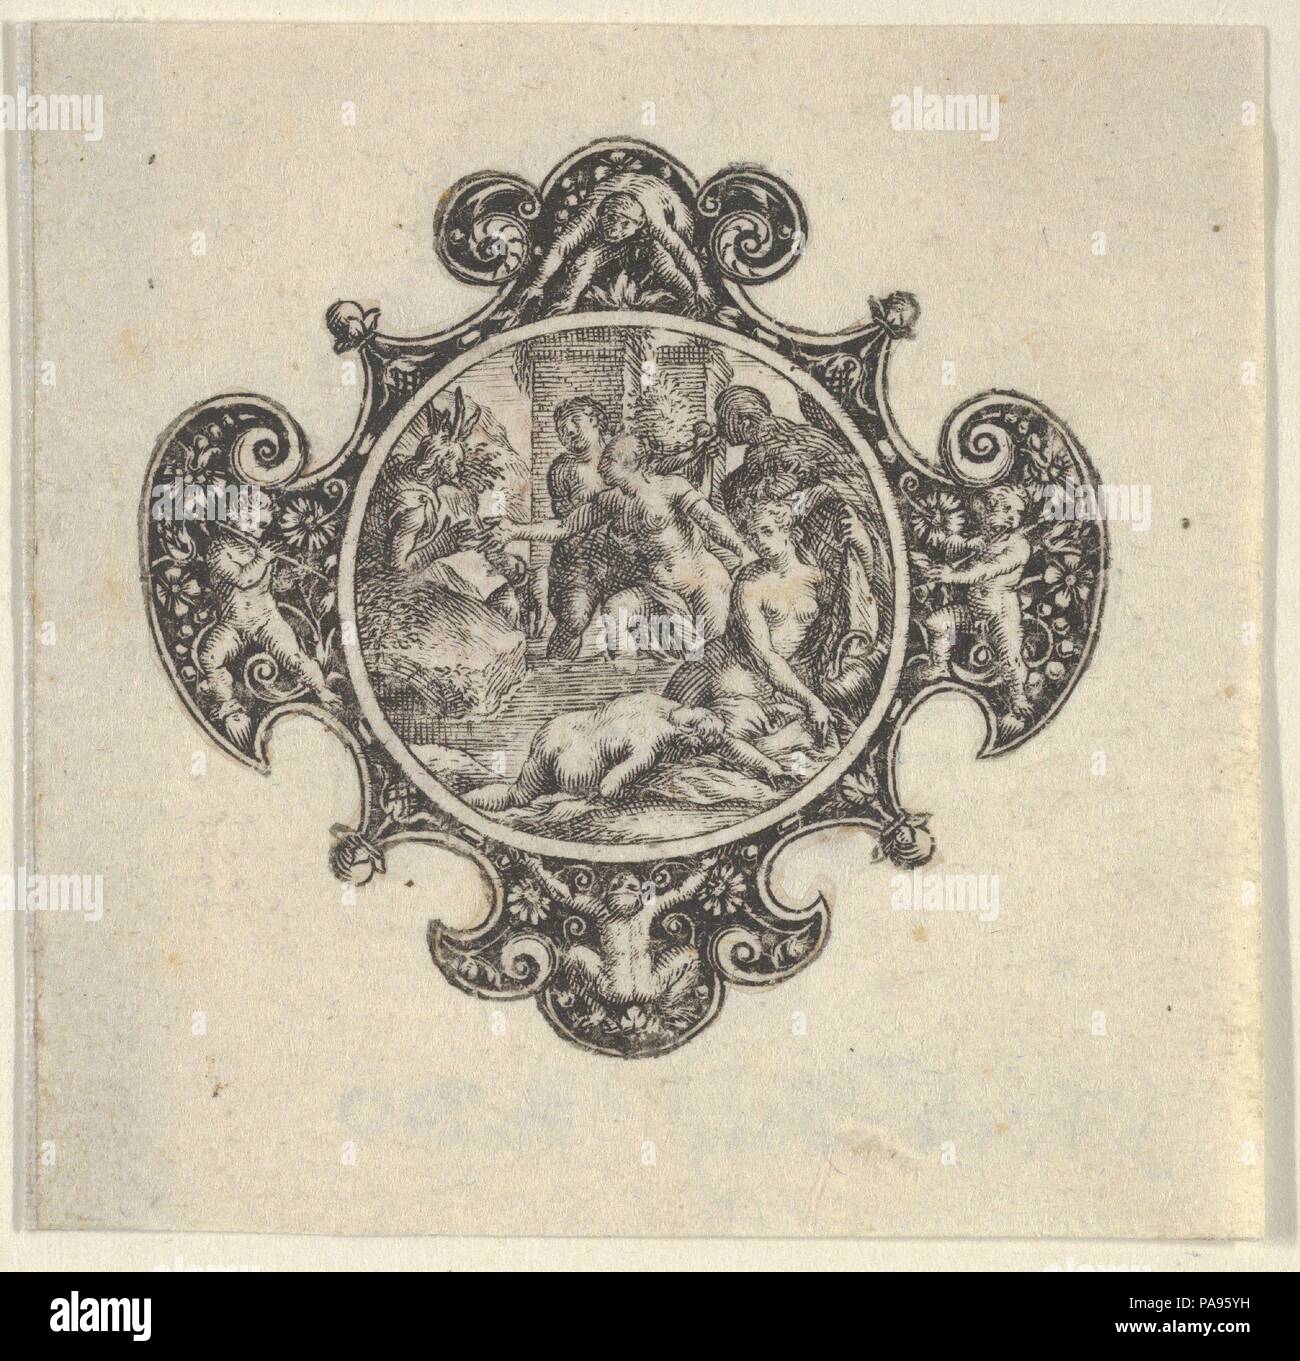 Copy of the Center of a Design for a Brooch. Artist: after Johann Theodor de Bry (Netherlandish, Strasbourg 1561-1623 Bad Schwalbach). Dimensions: Sheet: 1 7/8 × 2 5/16 in. (4.8 × 5.9 cm). Date: after 1580-1600.  Copy of the center of a brooch design, with a circular scene showing female figures addressing a horned male figure at left, framed by ornamental blackwork design with putti. Museum: Metropolitan Museum of Art, New York, USA. Stock Photo